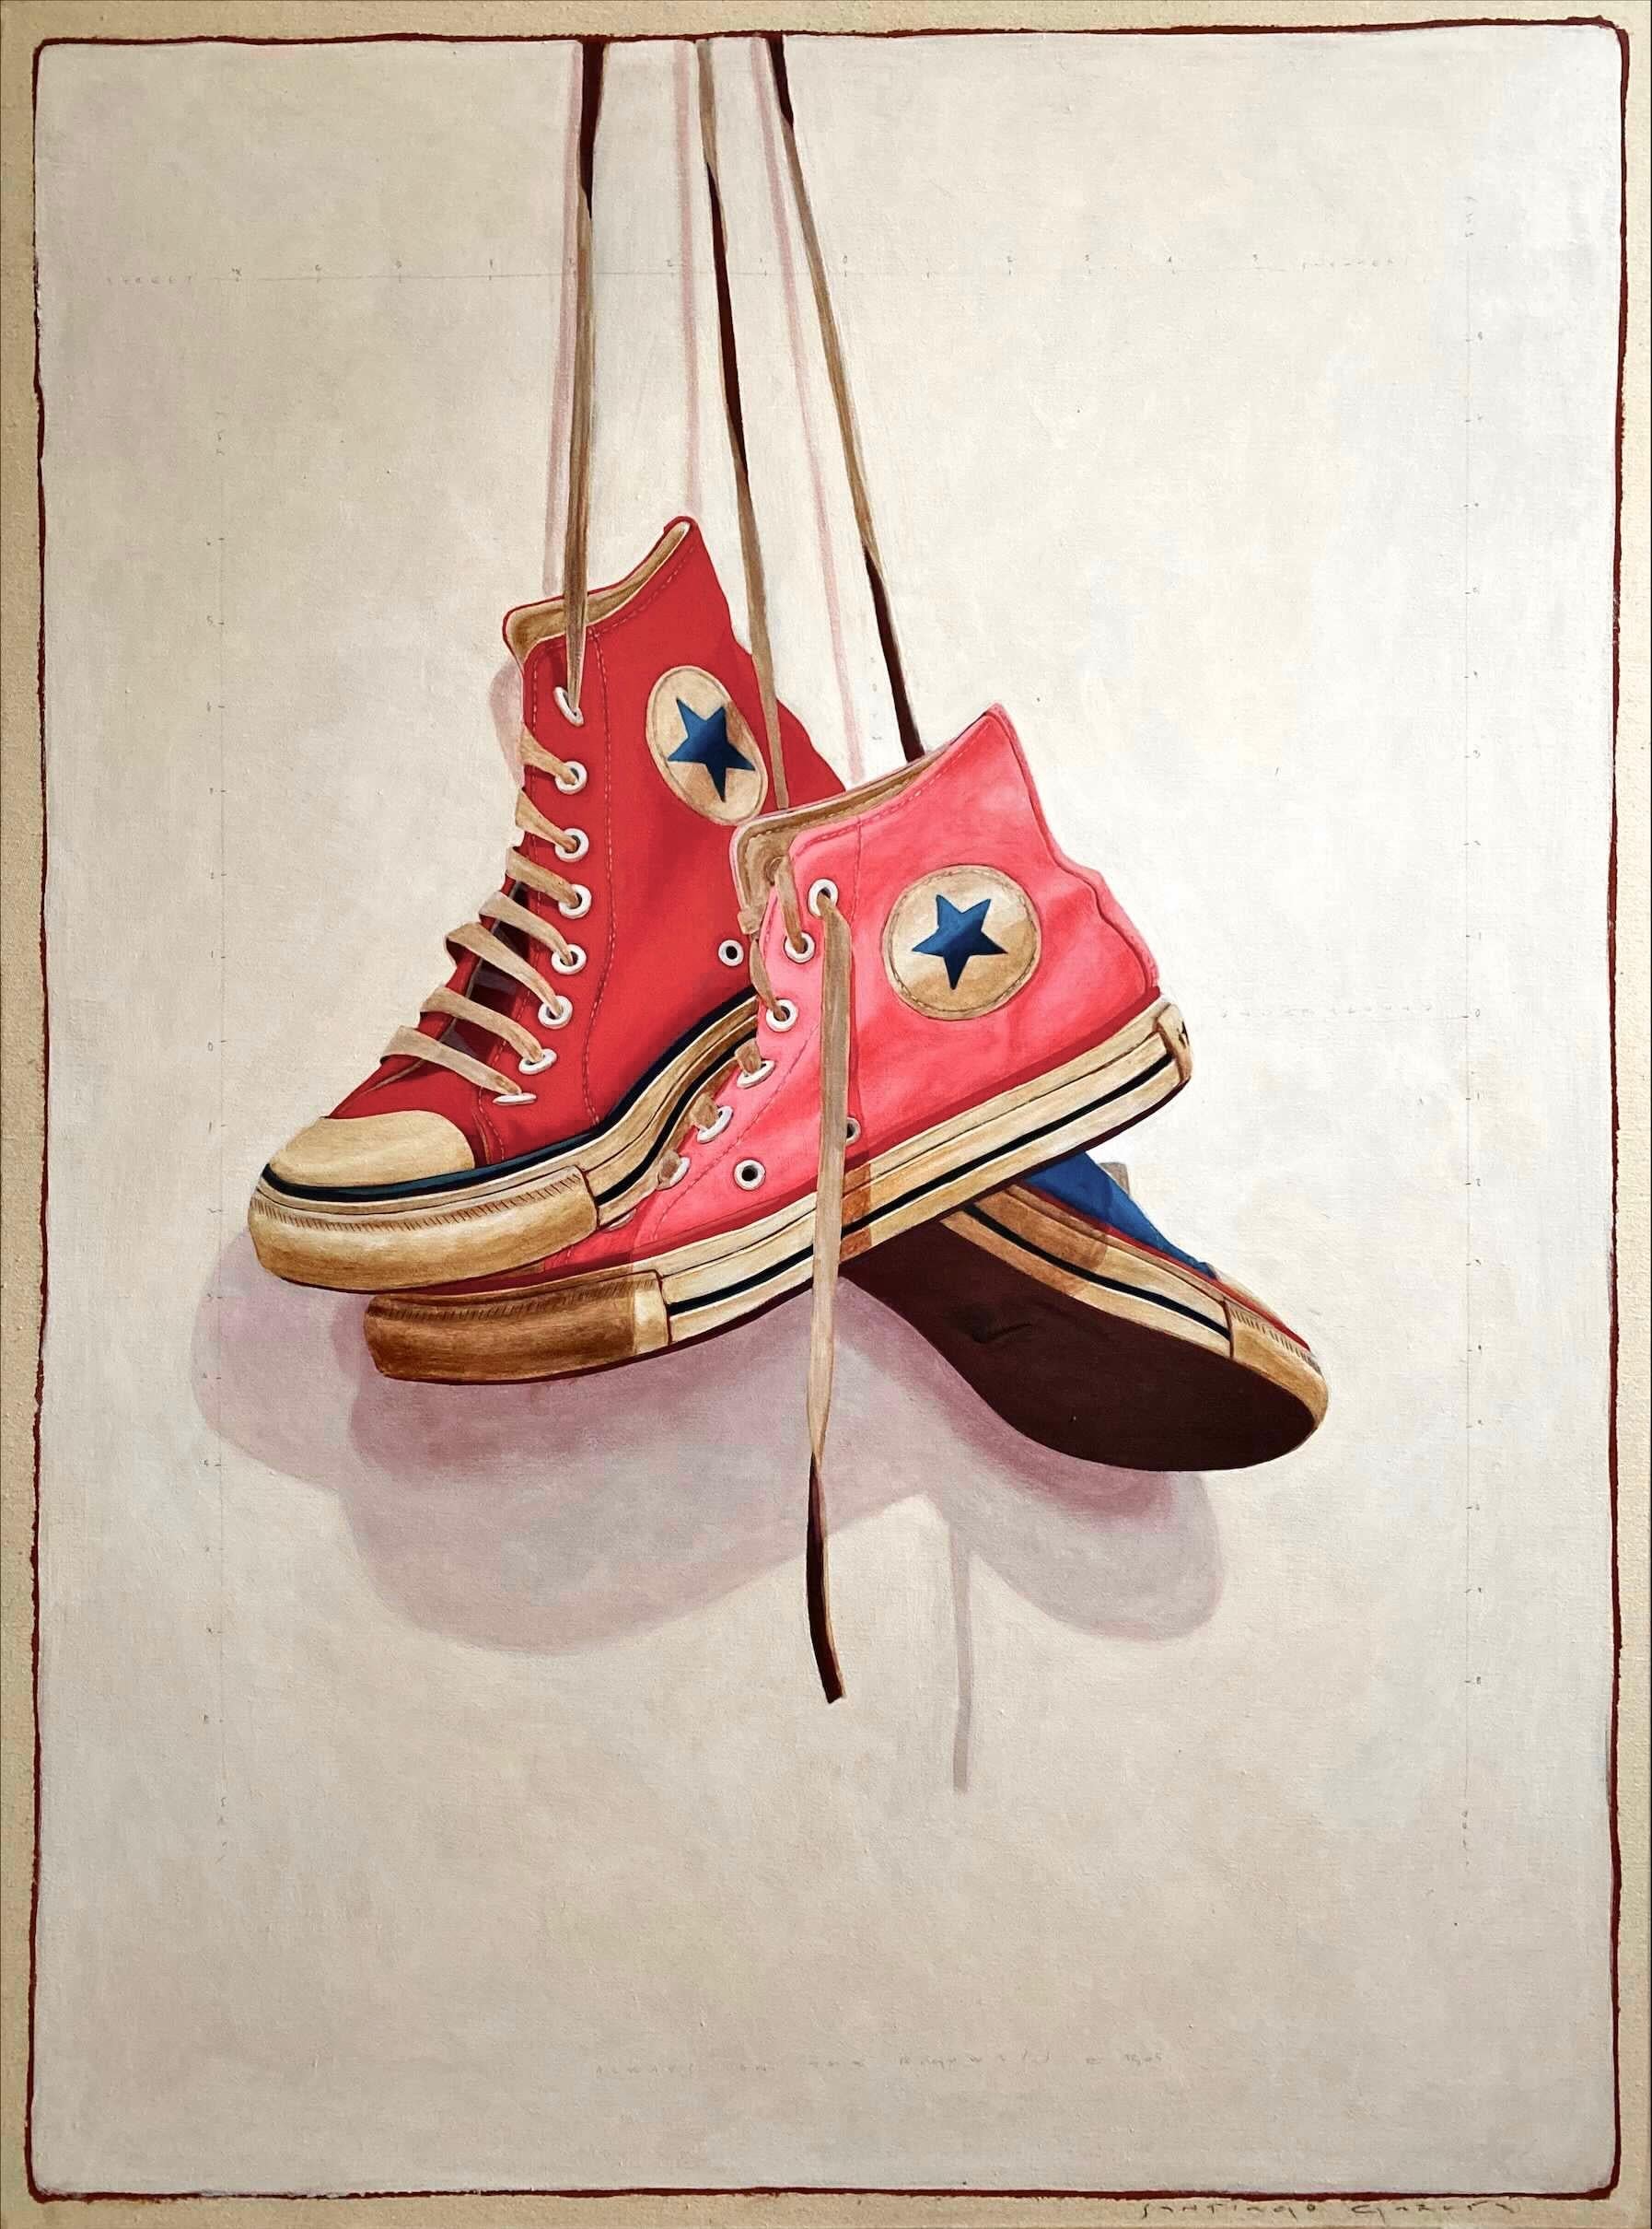 Santiago Garcia Still-Life Painting - "#1505" photorealistic oil painting of red, pink, and blue converse sneakers